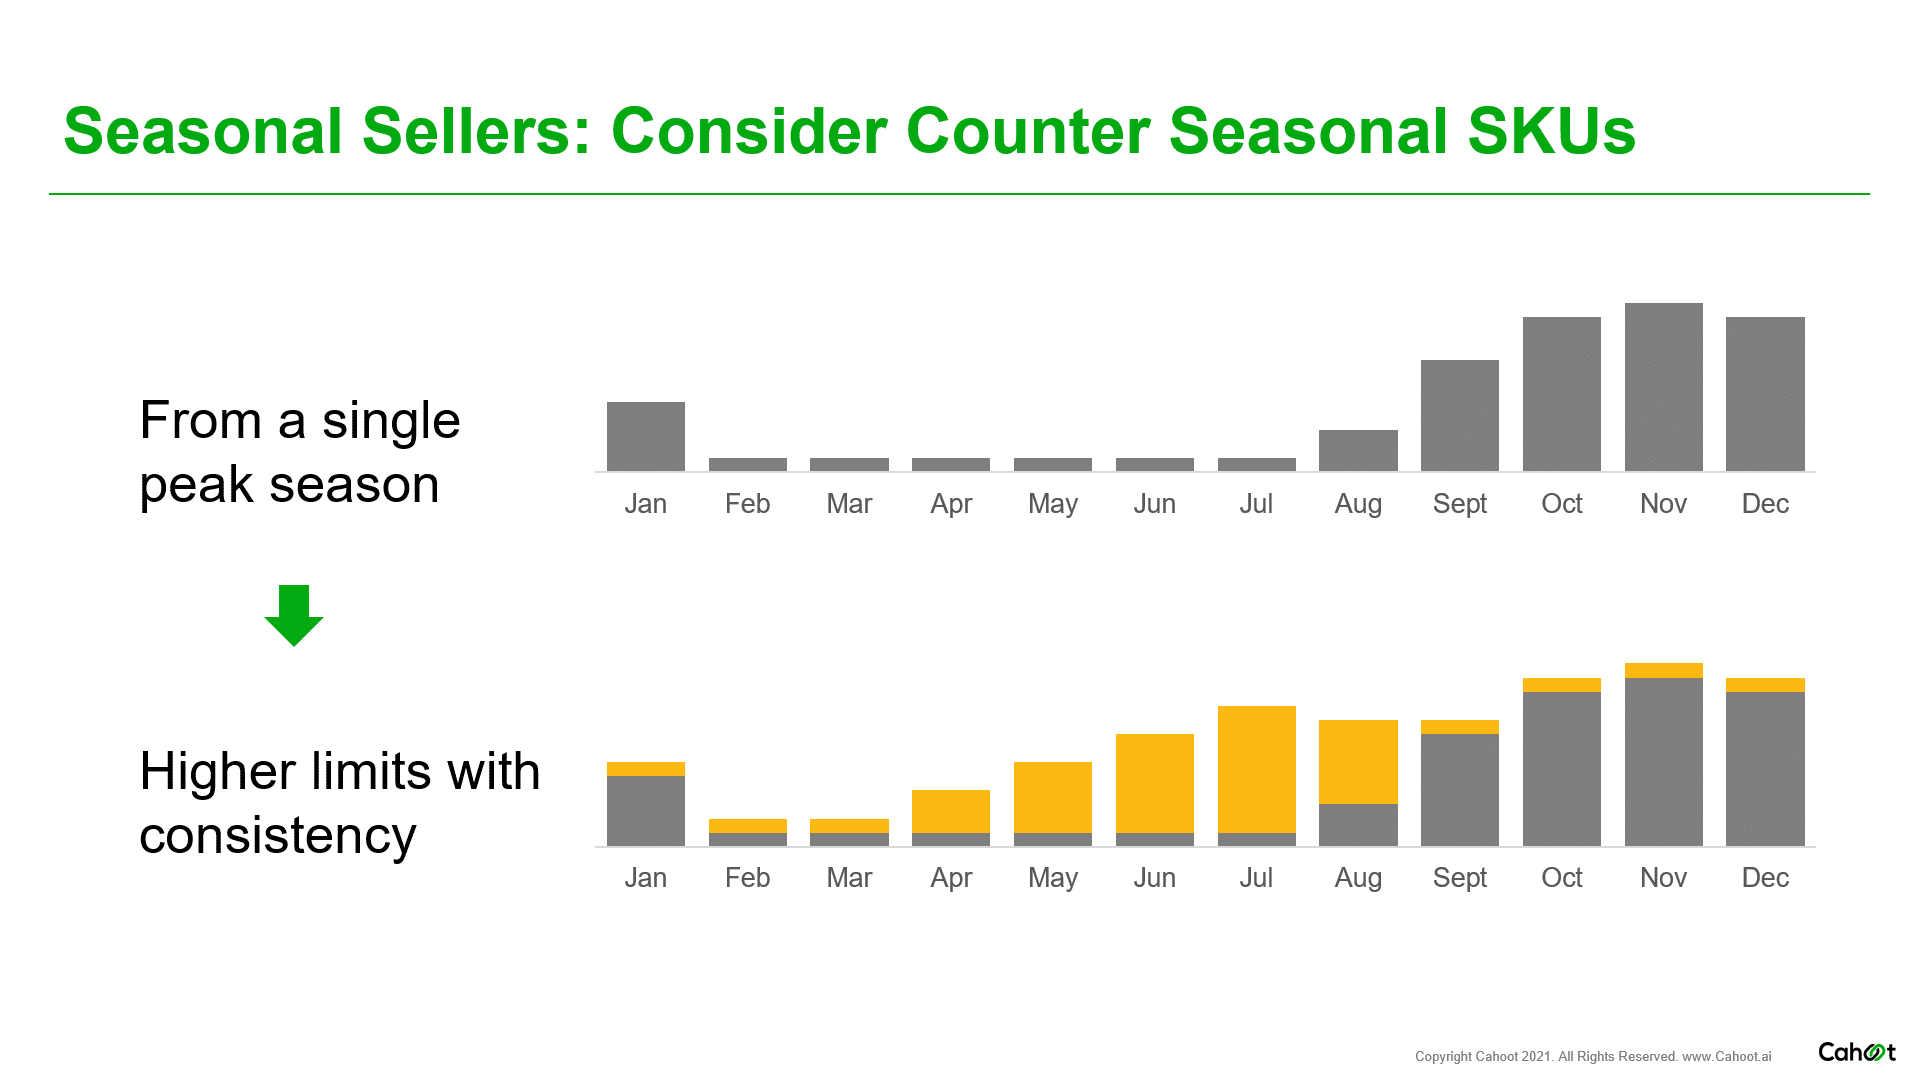 Amazon sellers can maintain higher storage limits by selling counter-seasonal ASINs in Q1-Q3